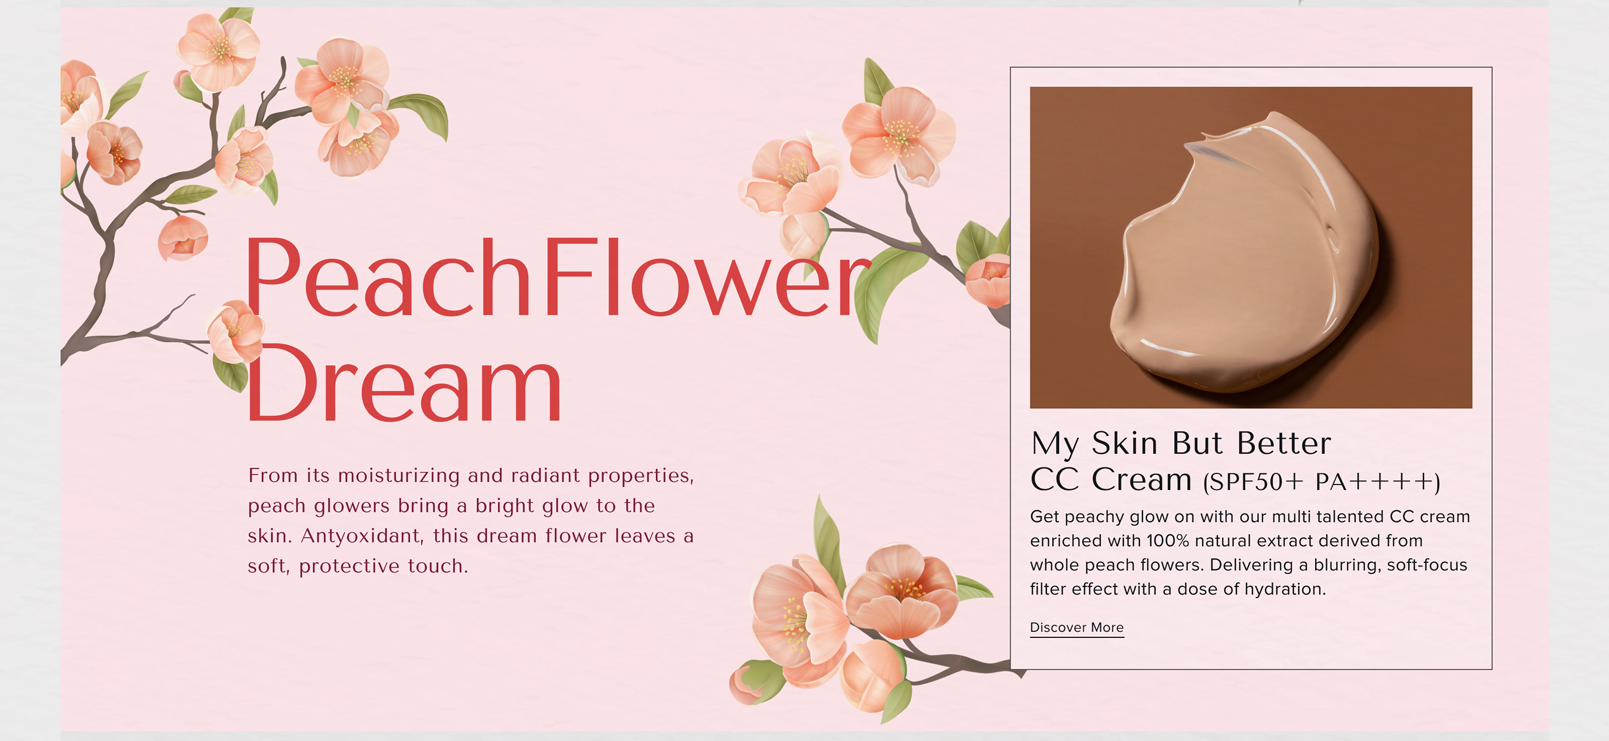 PeachFlower Dream From its moisturizing and radiant properties, peach glowers bring a bright glow to the skin. Antyoxidant, this dream flower leaves a soft, protective touch. - My Skin But Better CC Cream (SPF50+ PA++++)